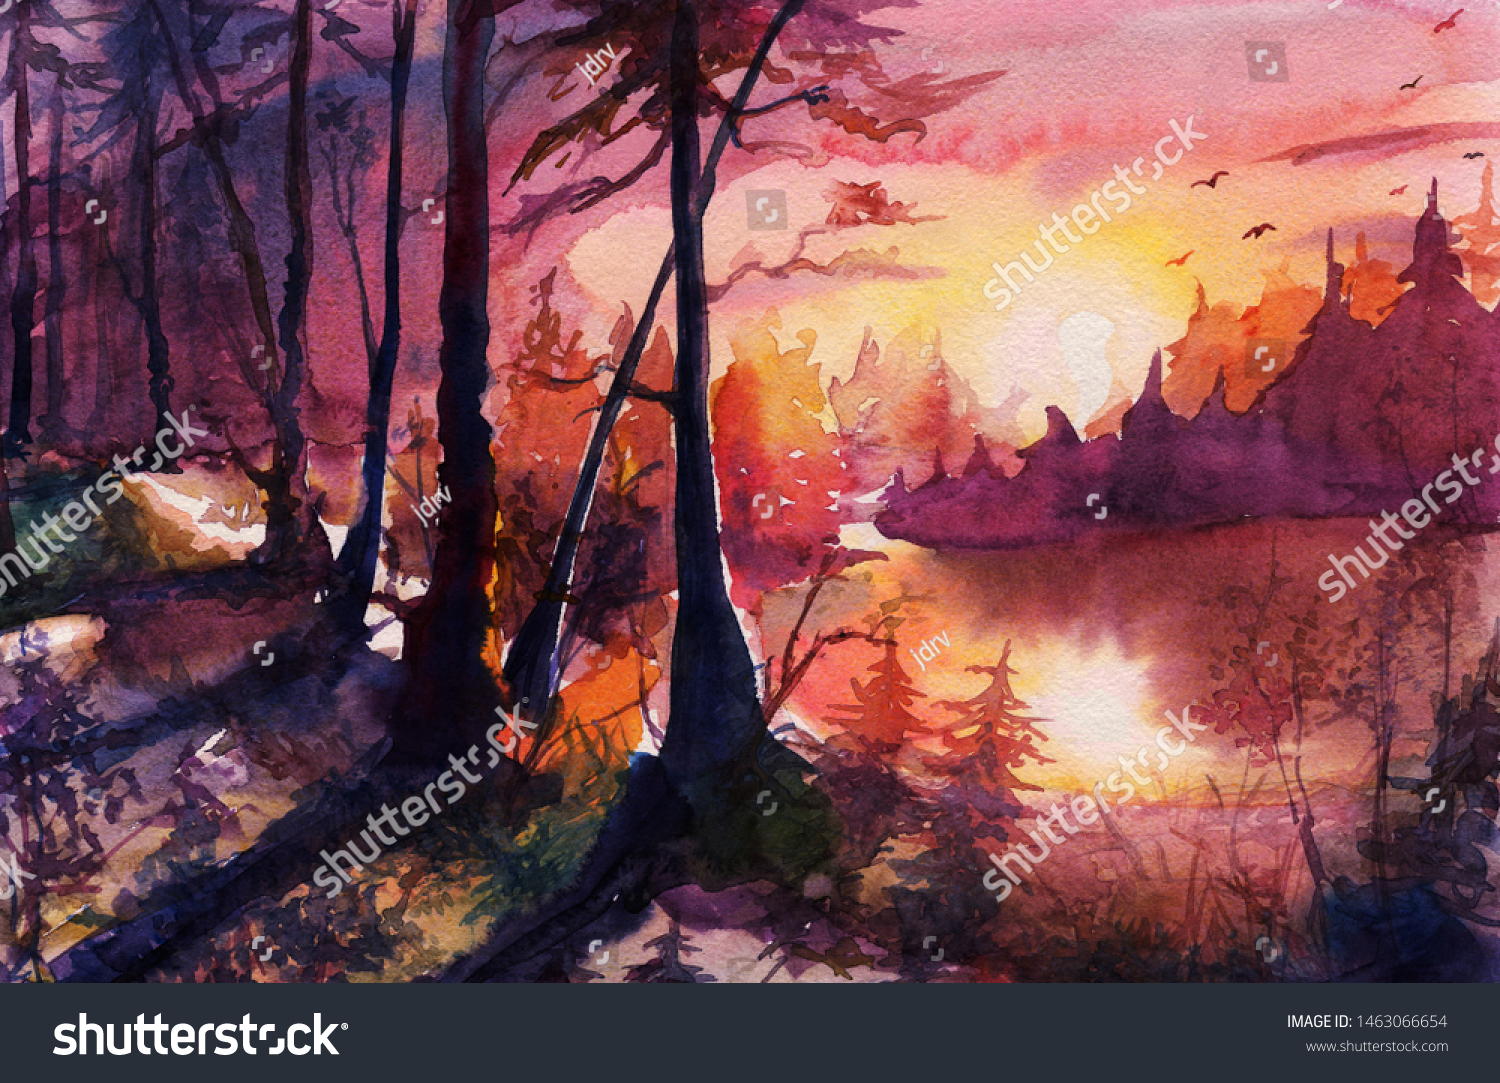 Featured image of post Watercolor Sunset Beautiful Scenery Drawing - ✓ free for commercial use ✓ high quality images.